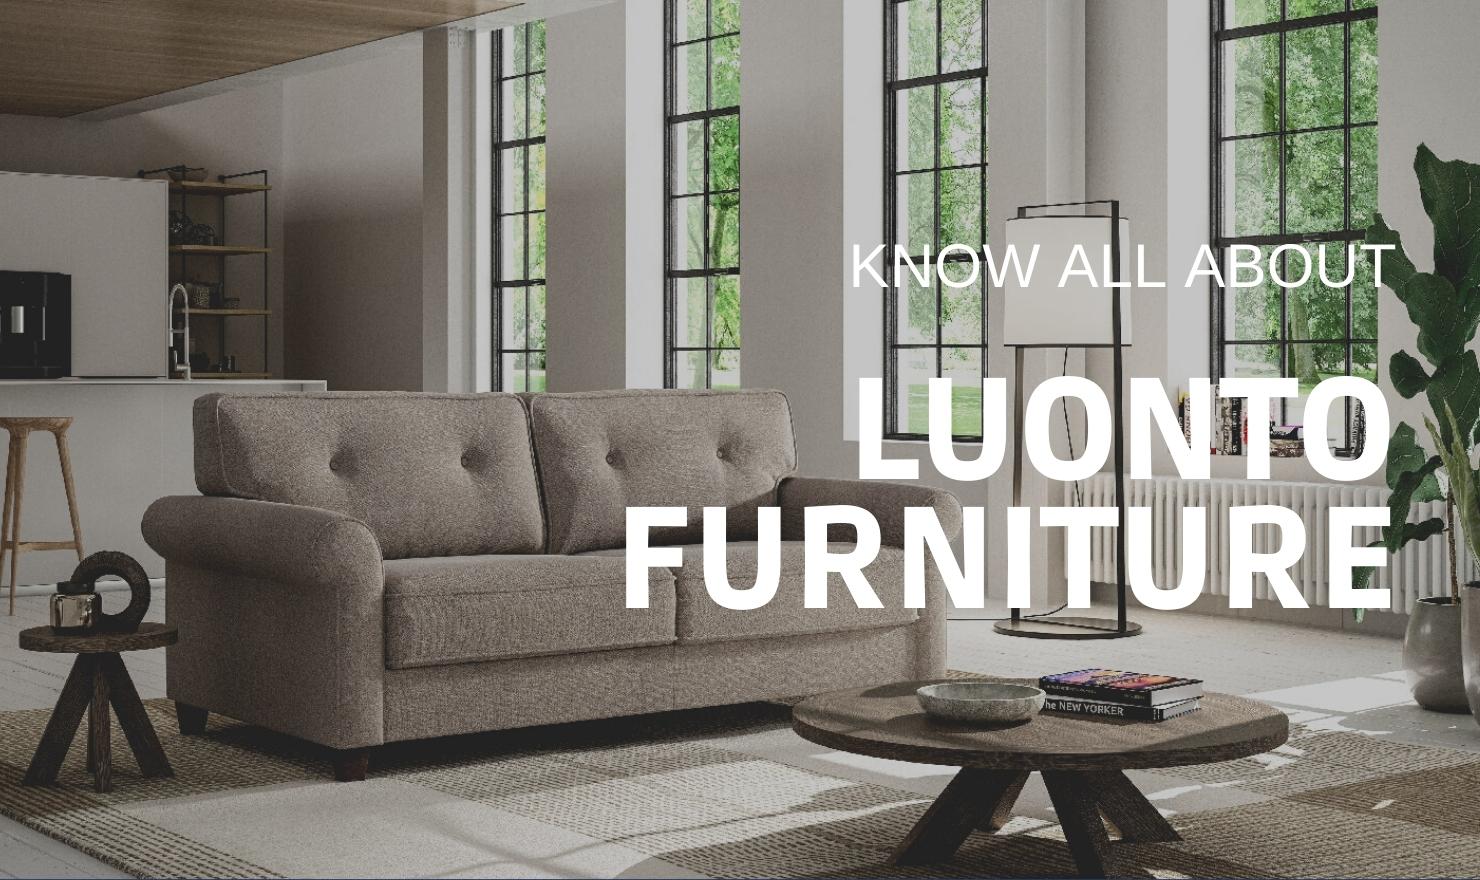 KNOW ALL ABOUT THE LUONTO FURNITURE